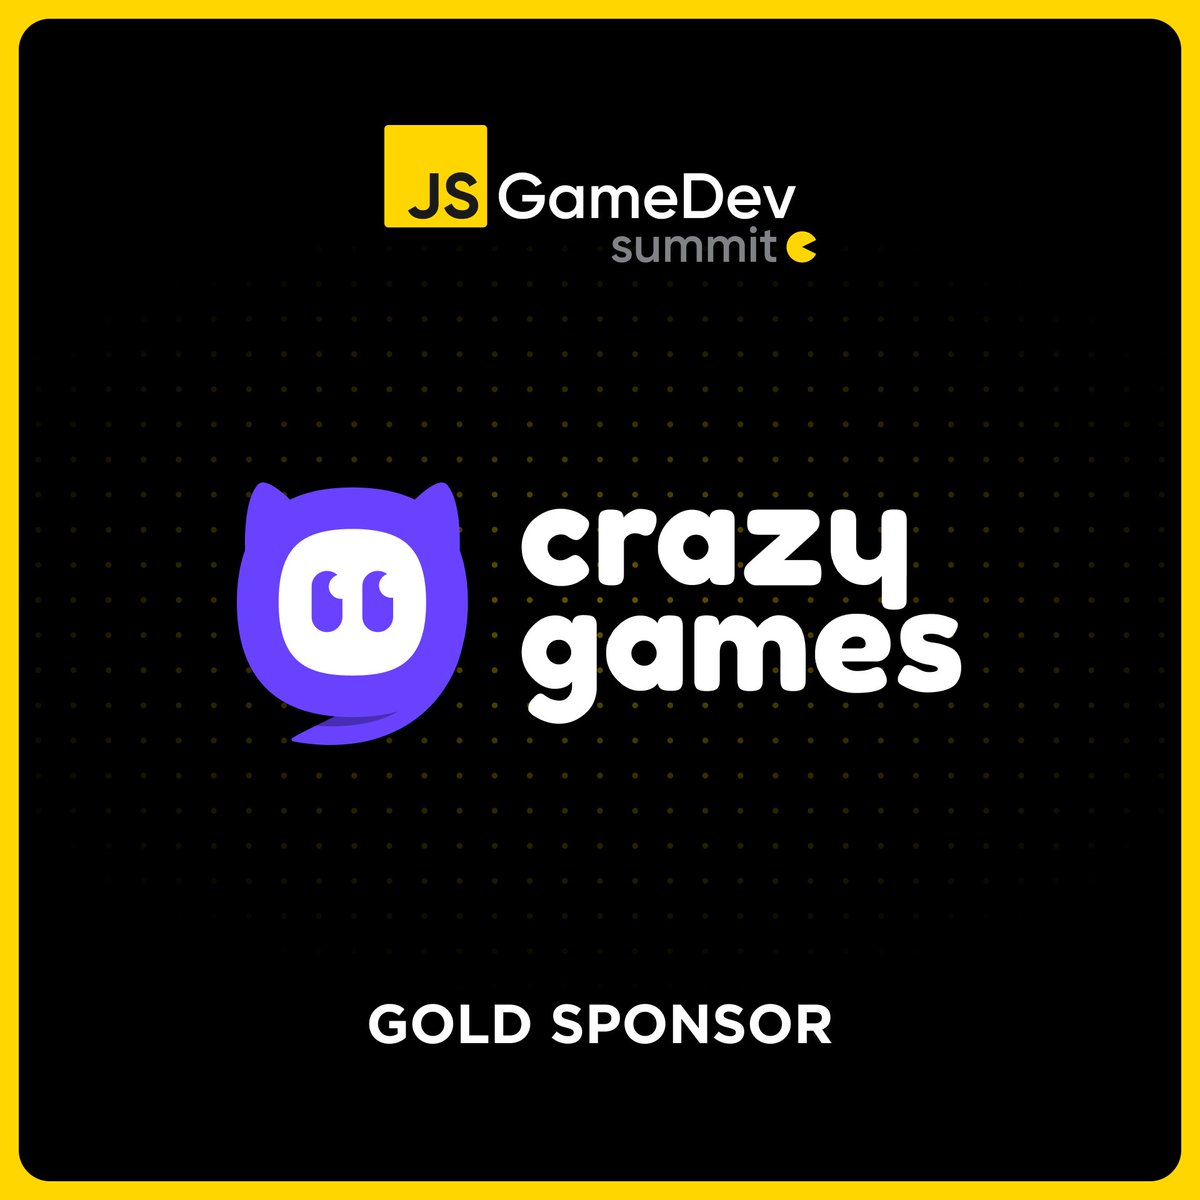 How to Earn Money With Demos & Jam Games (Godot Engine + CrazyGames) 